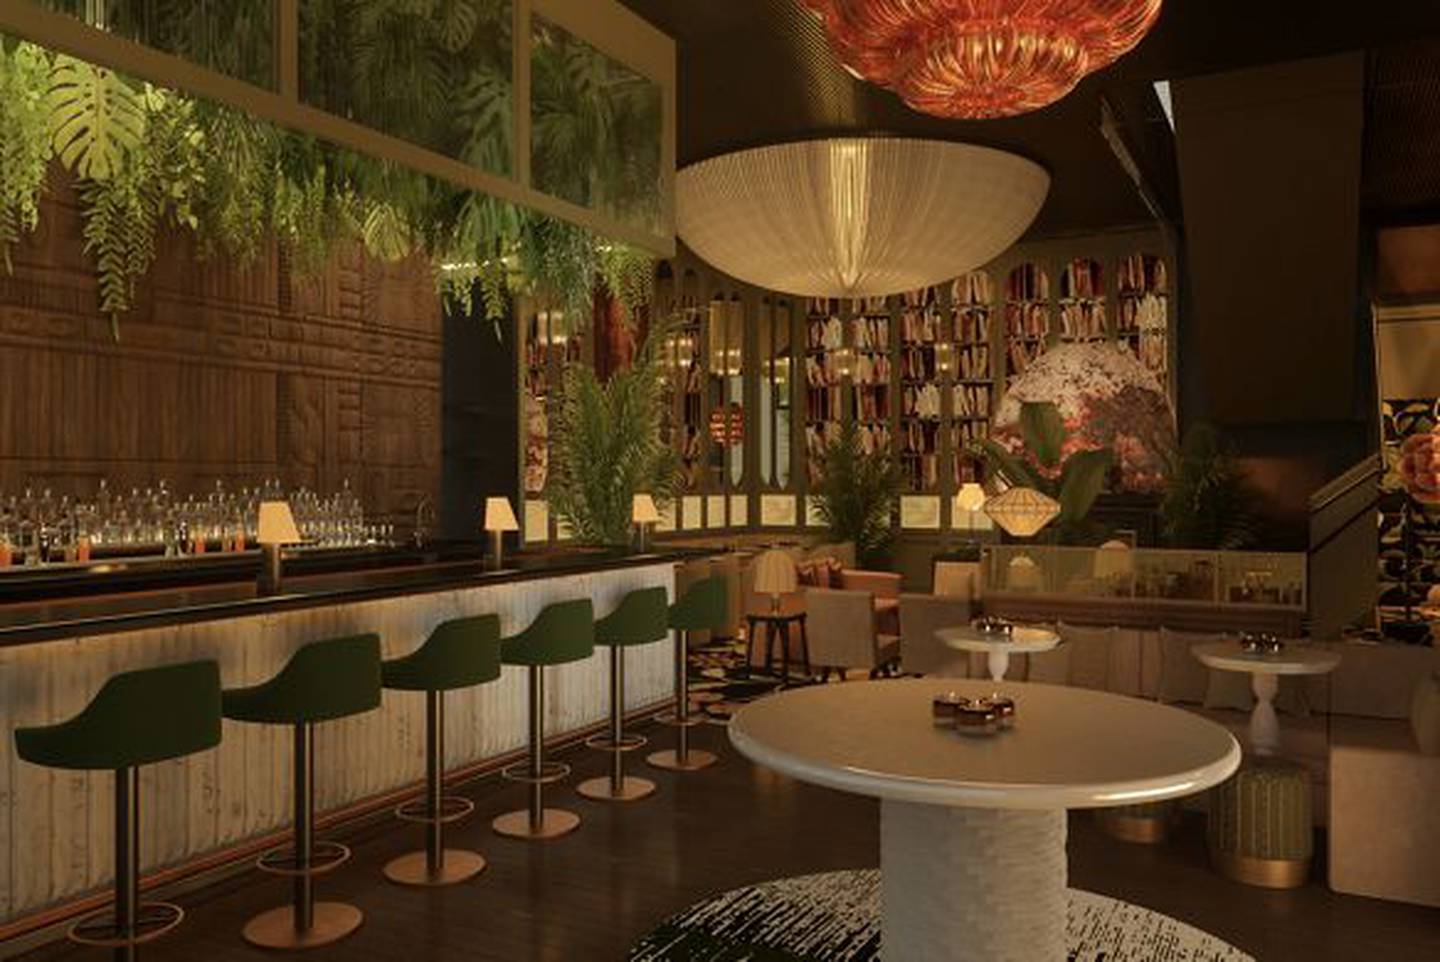 Making its debut later in the year is The Bazaar by Michelin-lauded chef Jose Andres. Photo: Marriott